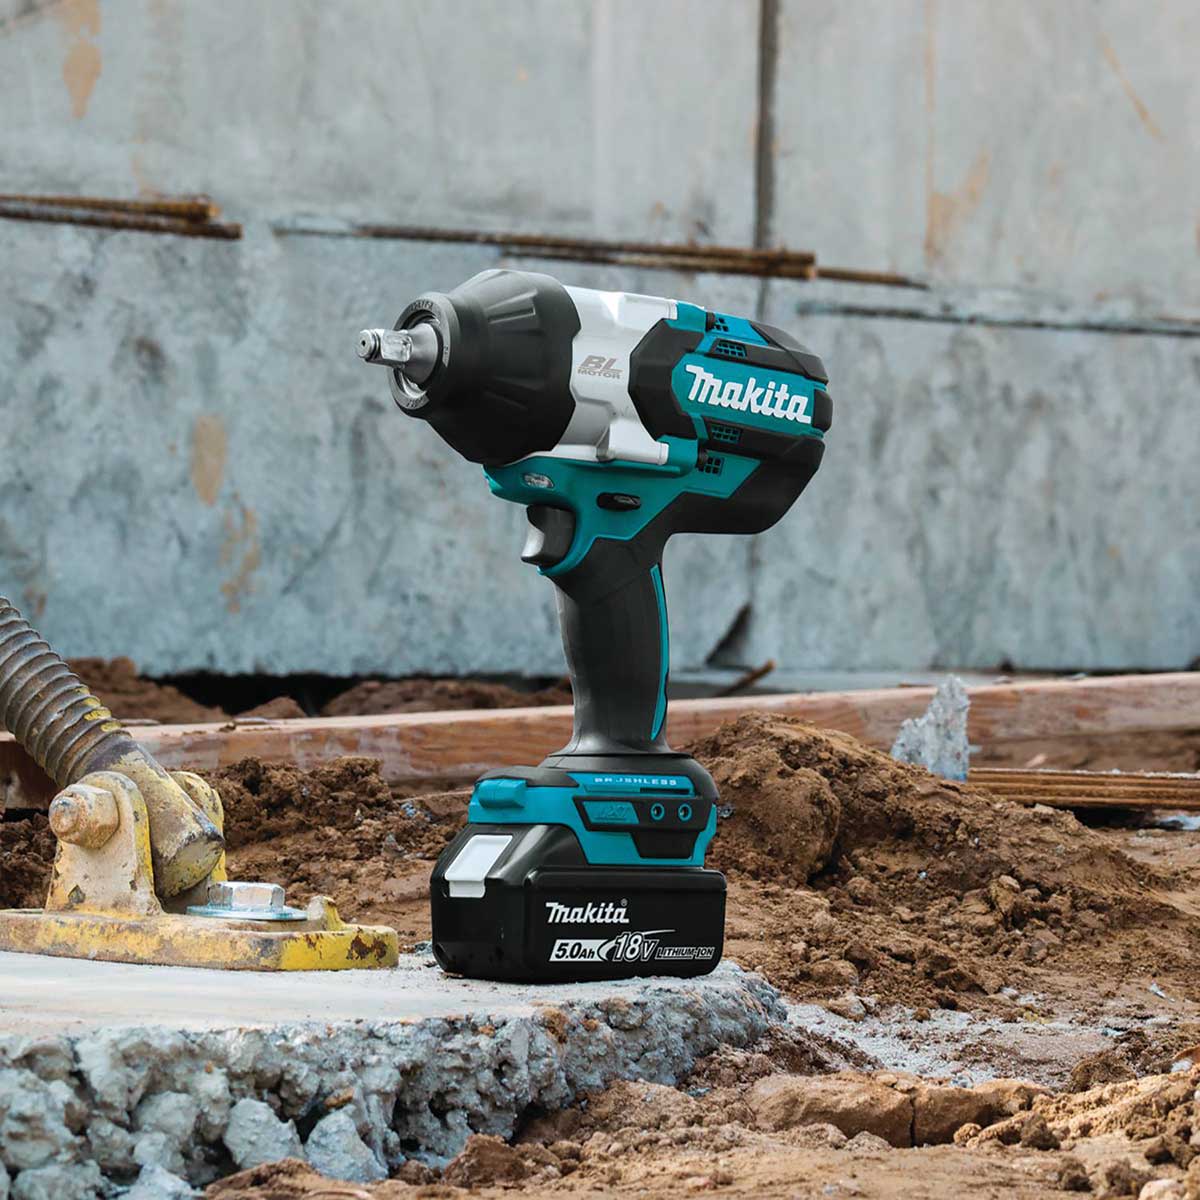 Makita XWT08T 18V LXT® Lithium-Ion Brushless Cordless High Torque 1/2" Sq. Drive Impact Wrench